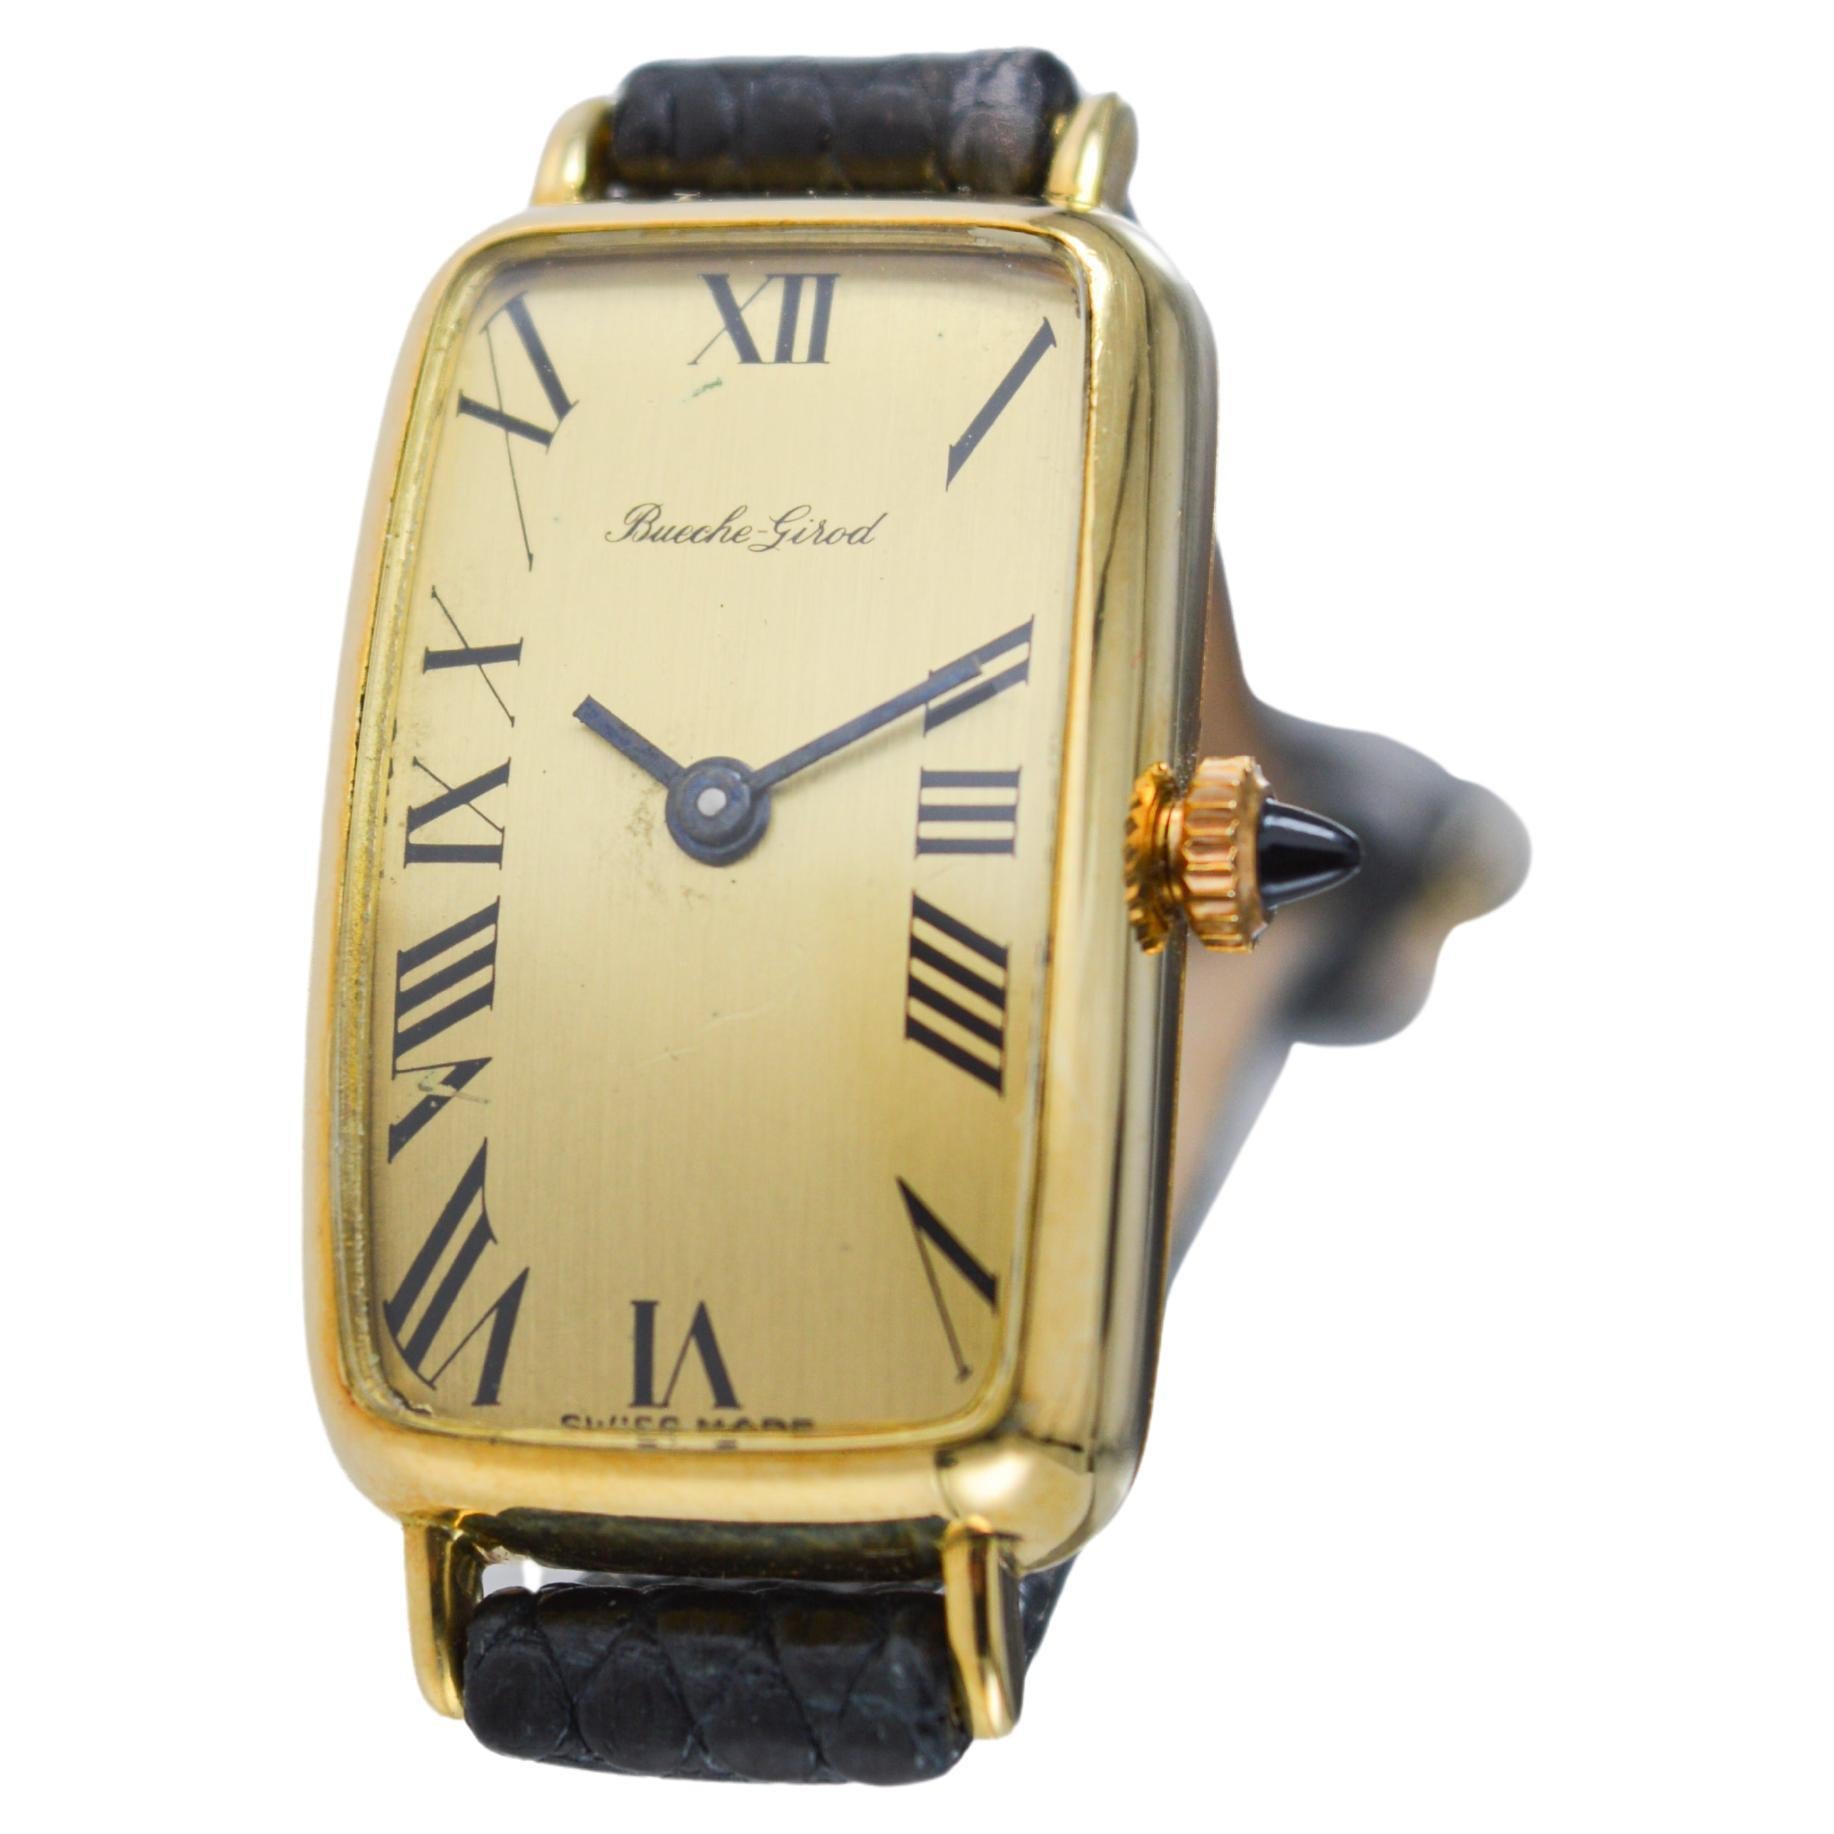 Bueche Girod 18 Karat, Yellow Midcentury Watch Originally Owned by Jerry Lewis For Sale 1